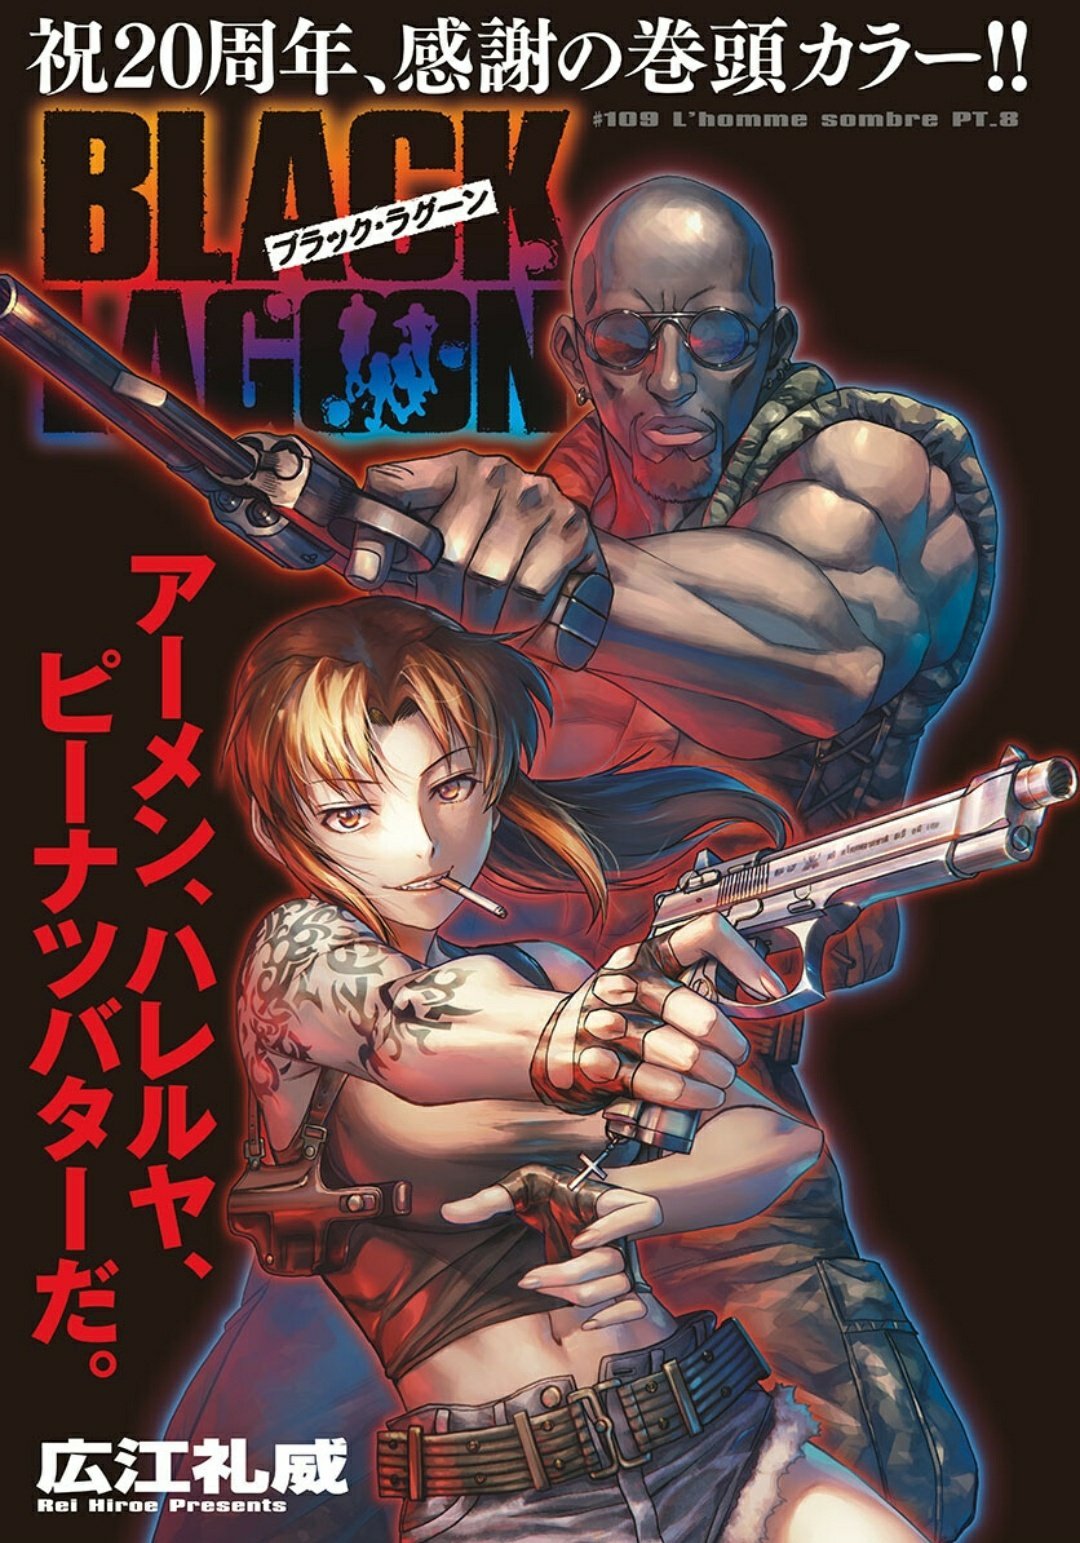 Black Lagoon chapter 109 color page